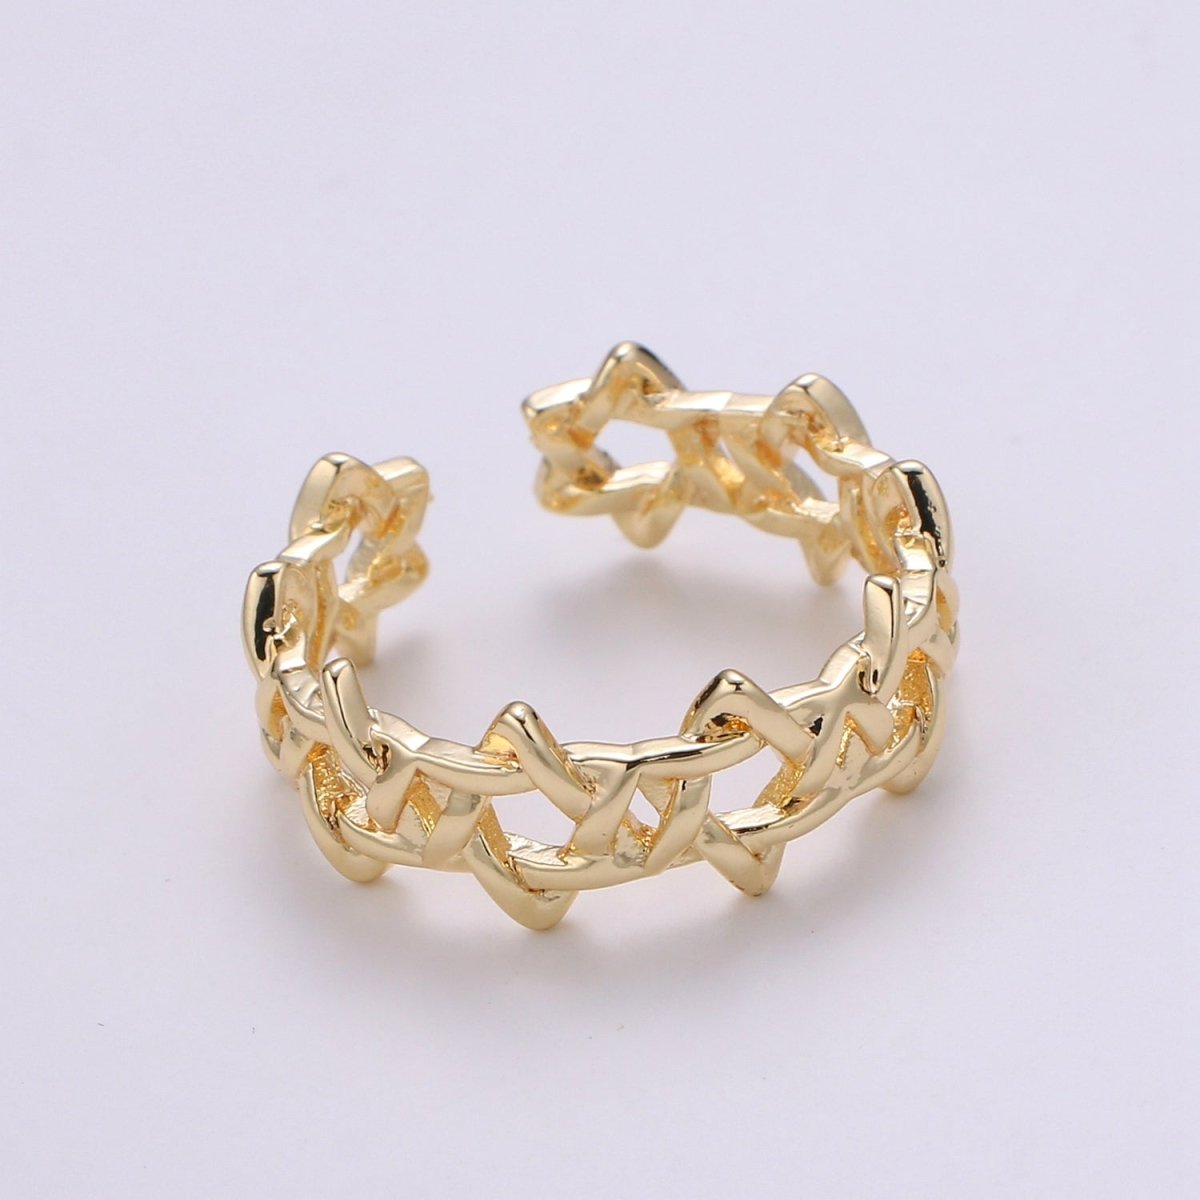 OS DEL-18K Gold Filled Star Chain Adjustable Ring - R274 - DLUXCA